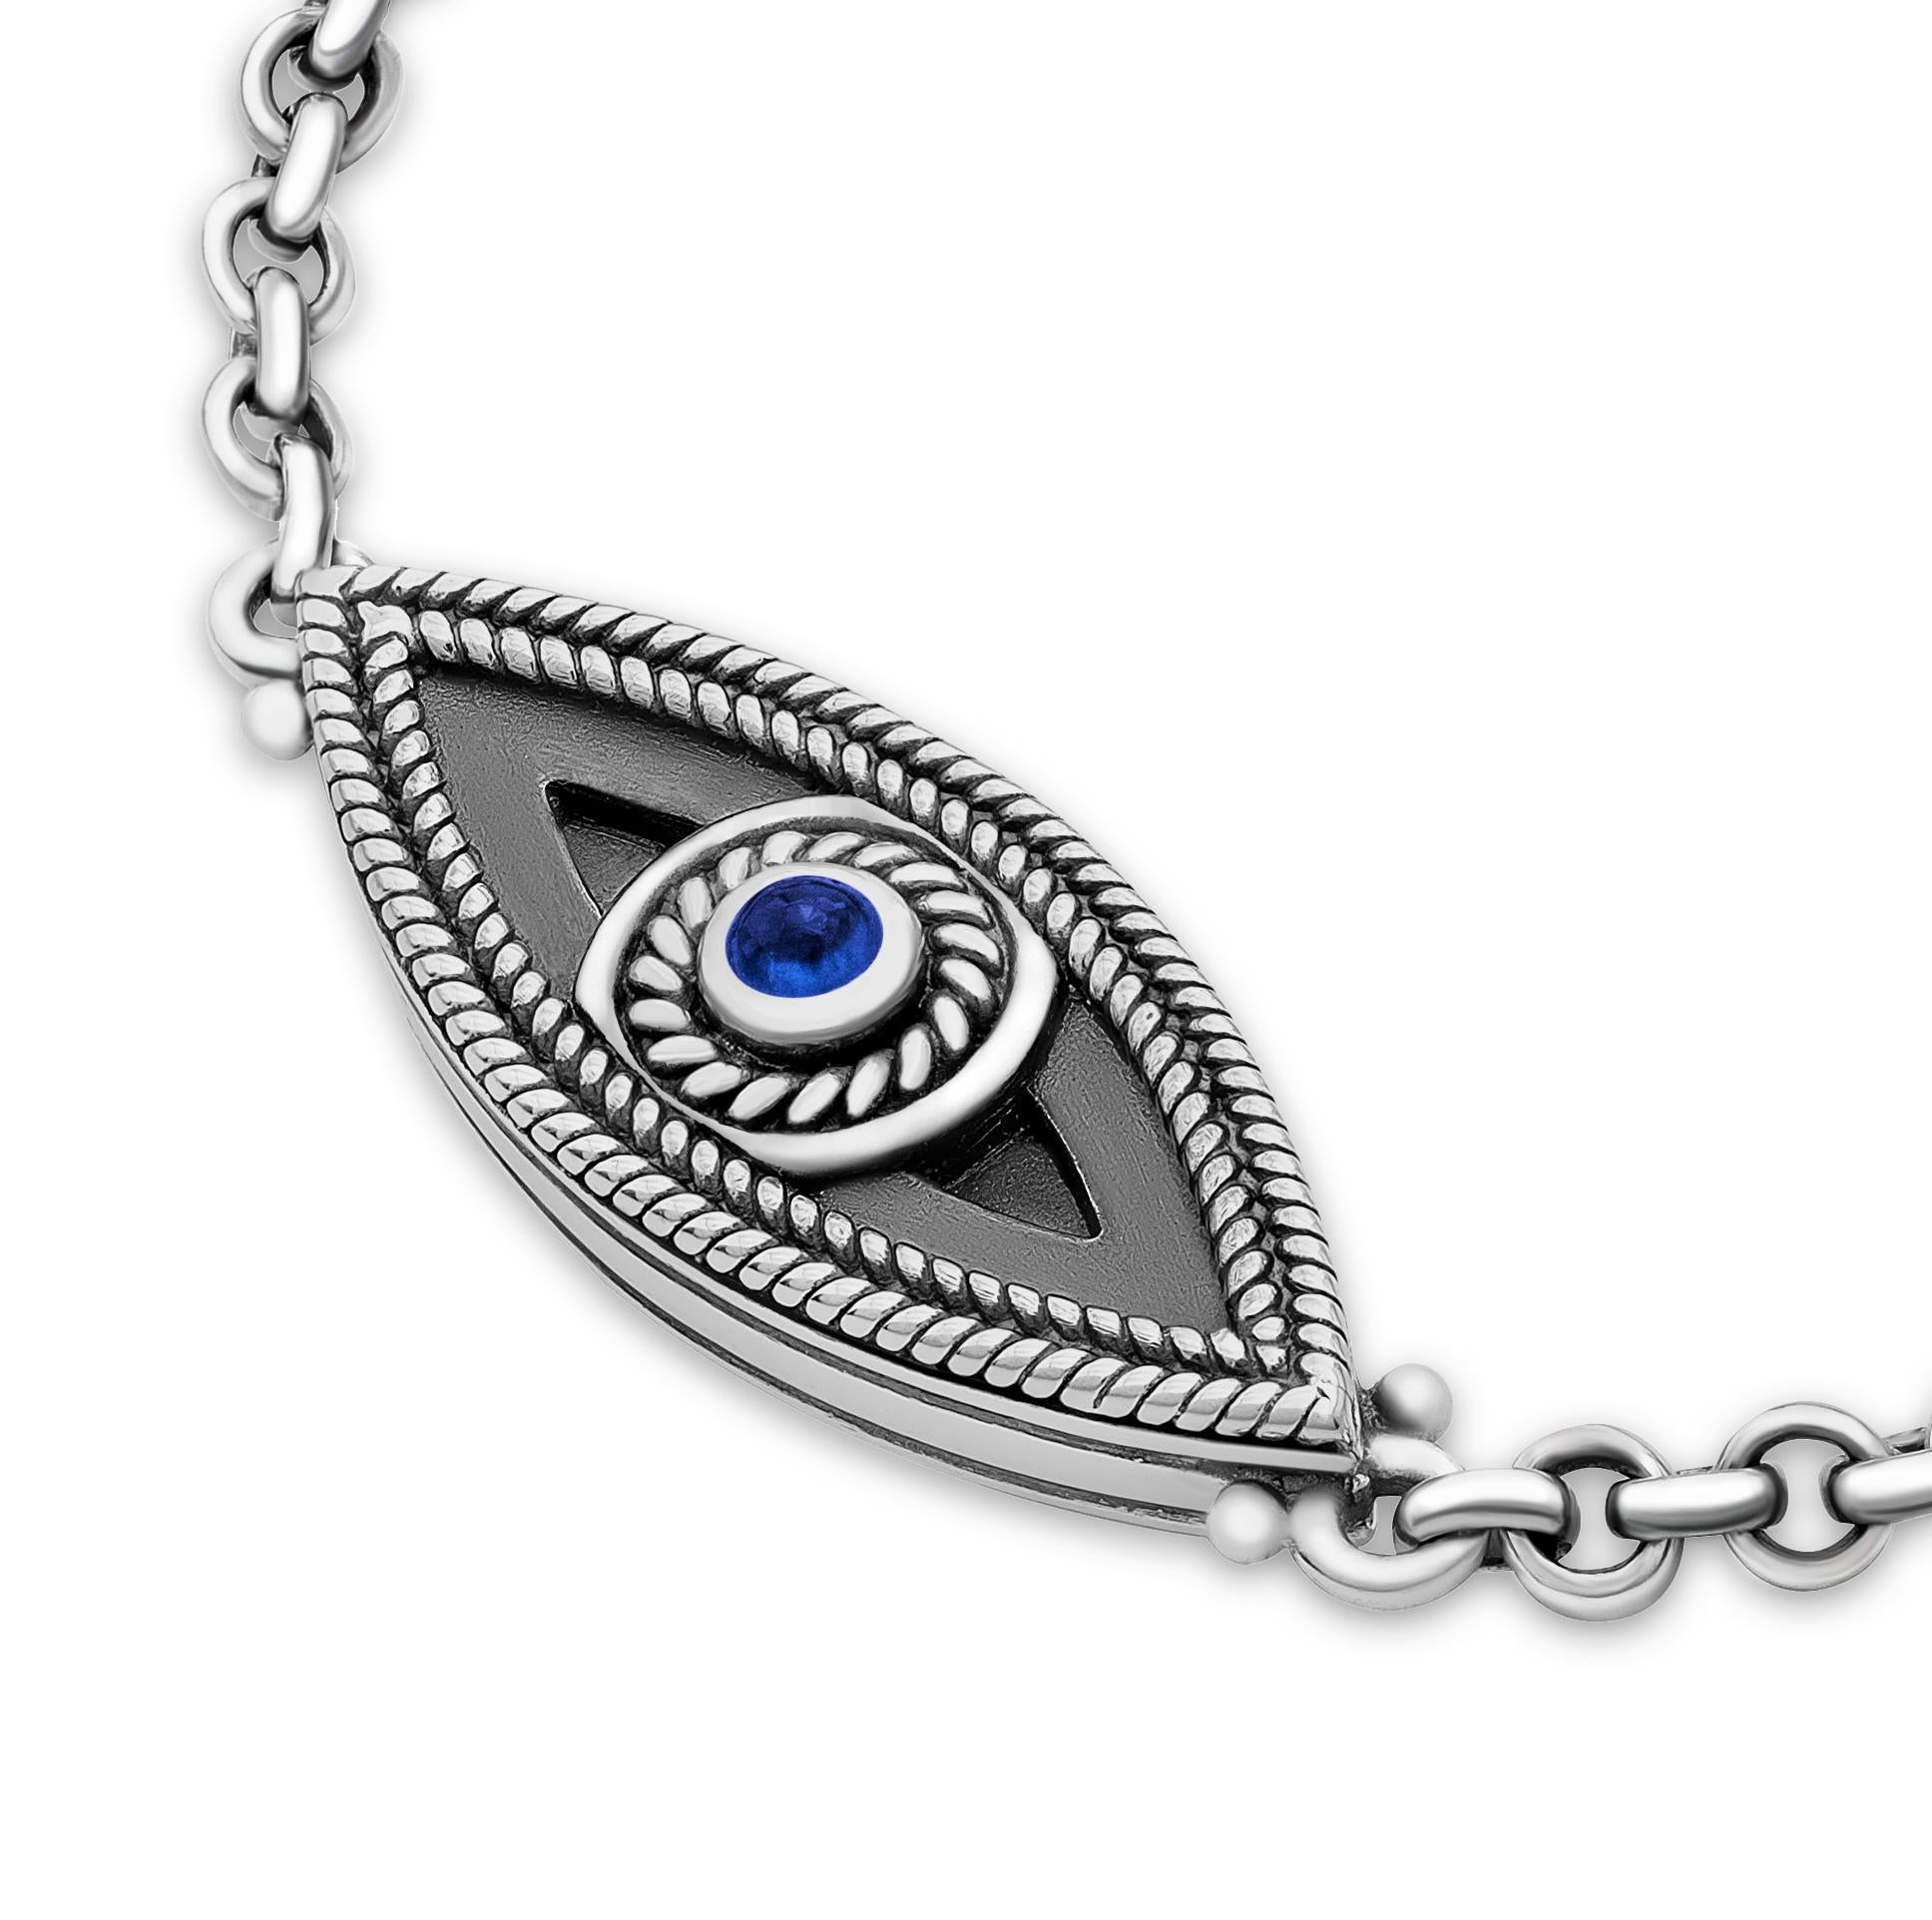 Sterling Silver Keychain to protect the wearer from the evil eye.

Featuring the eye, a symbol known throughout the Middle East for warding off envy, the Sterling Silver easy-closure Protection Key Chain is adorned with Sapphires.

Full Keychain